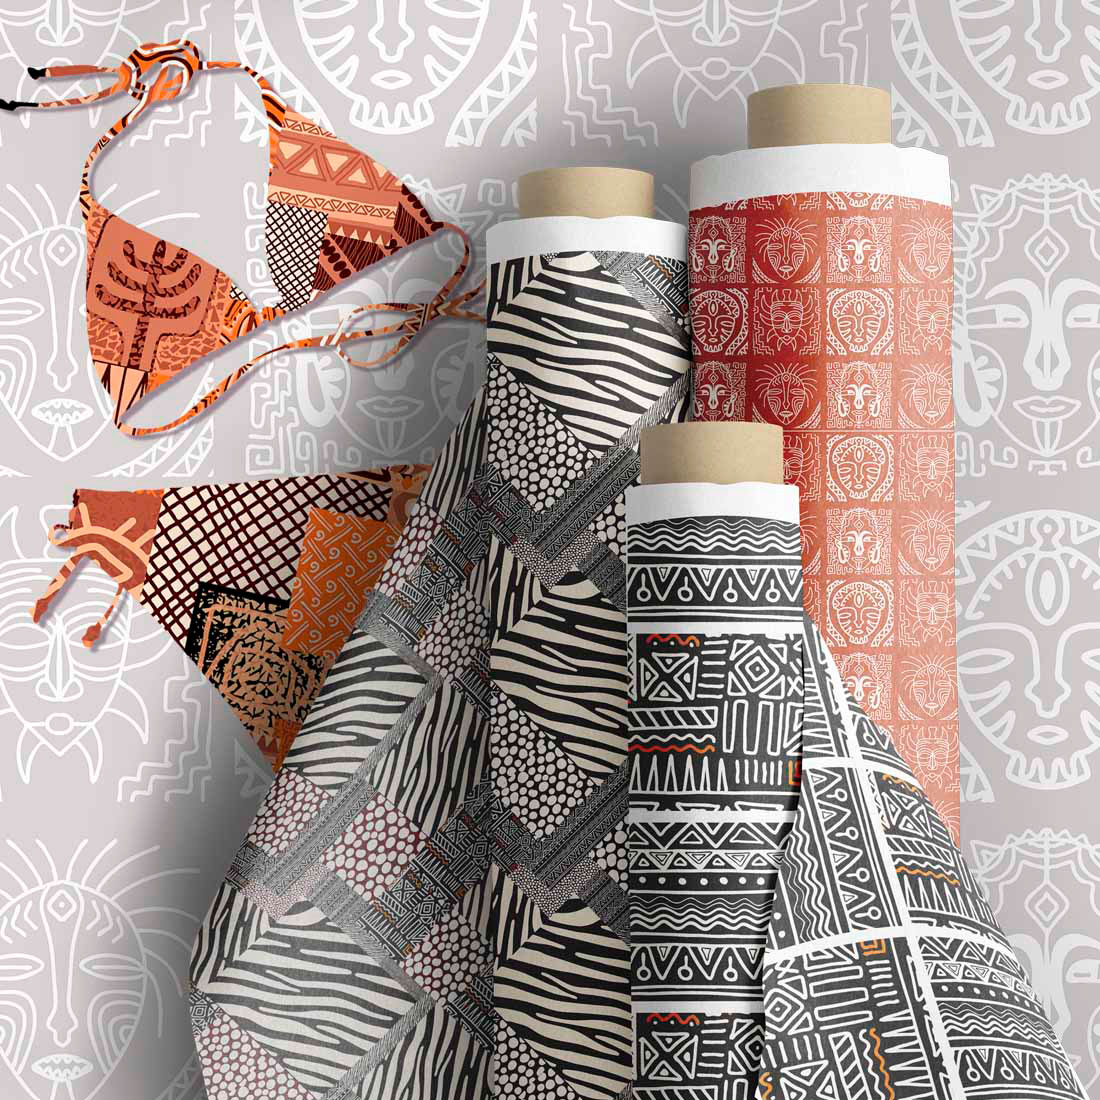 Image of wrapping paper with colorful African pattern.